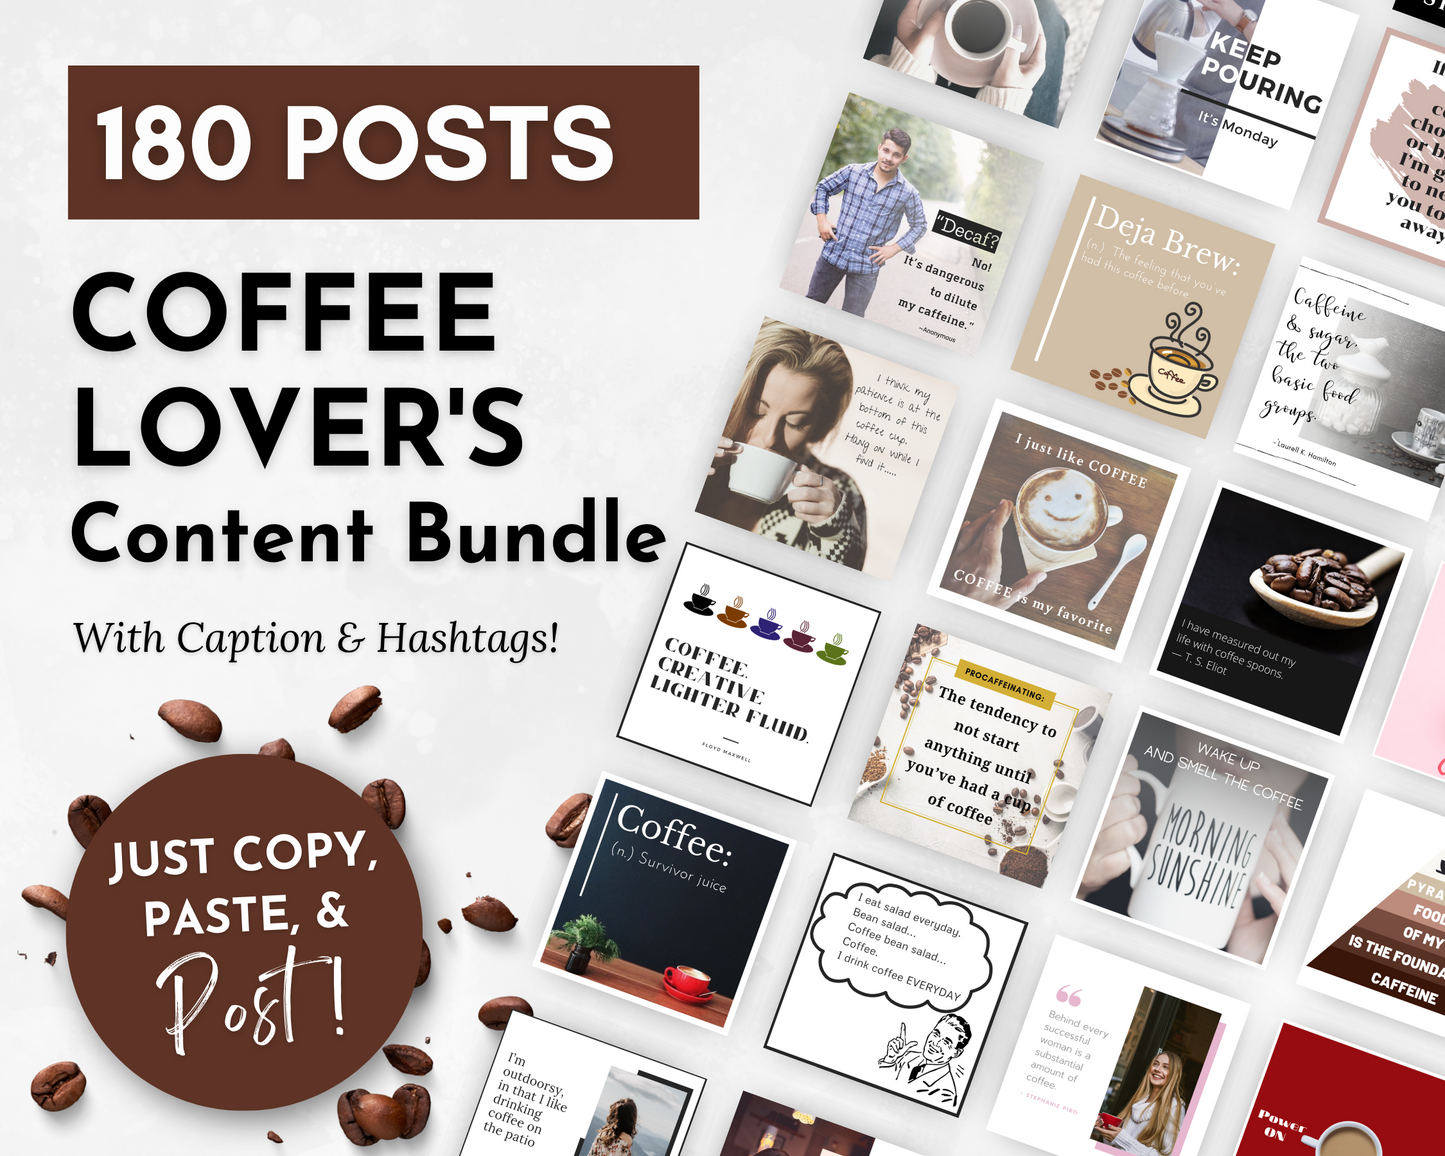 Coffee Lover's Social Media Post Bundle from Socially Inclined - NO Canva Templates.